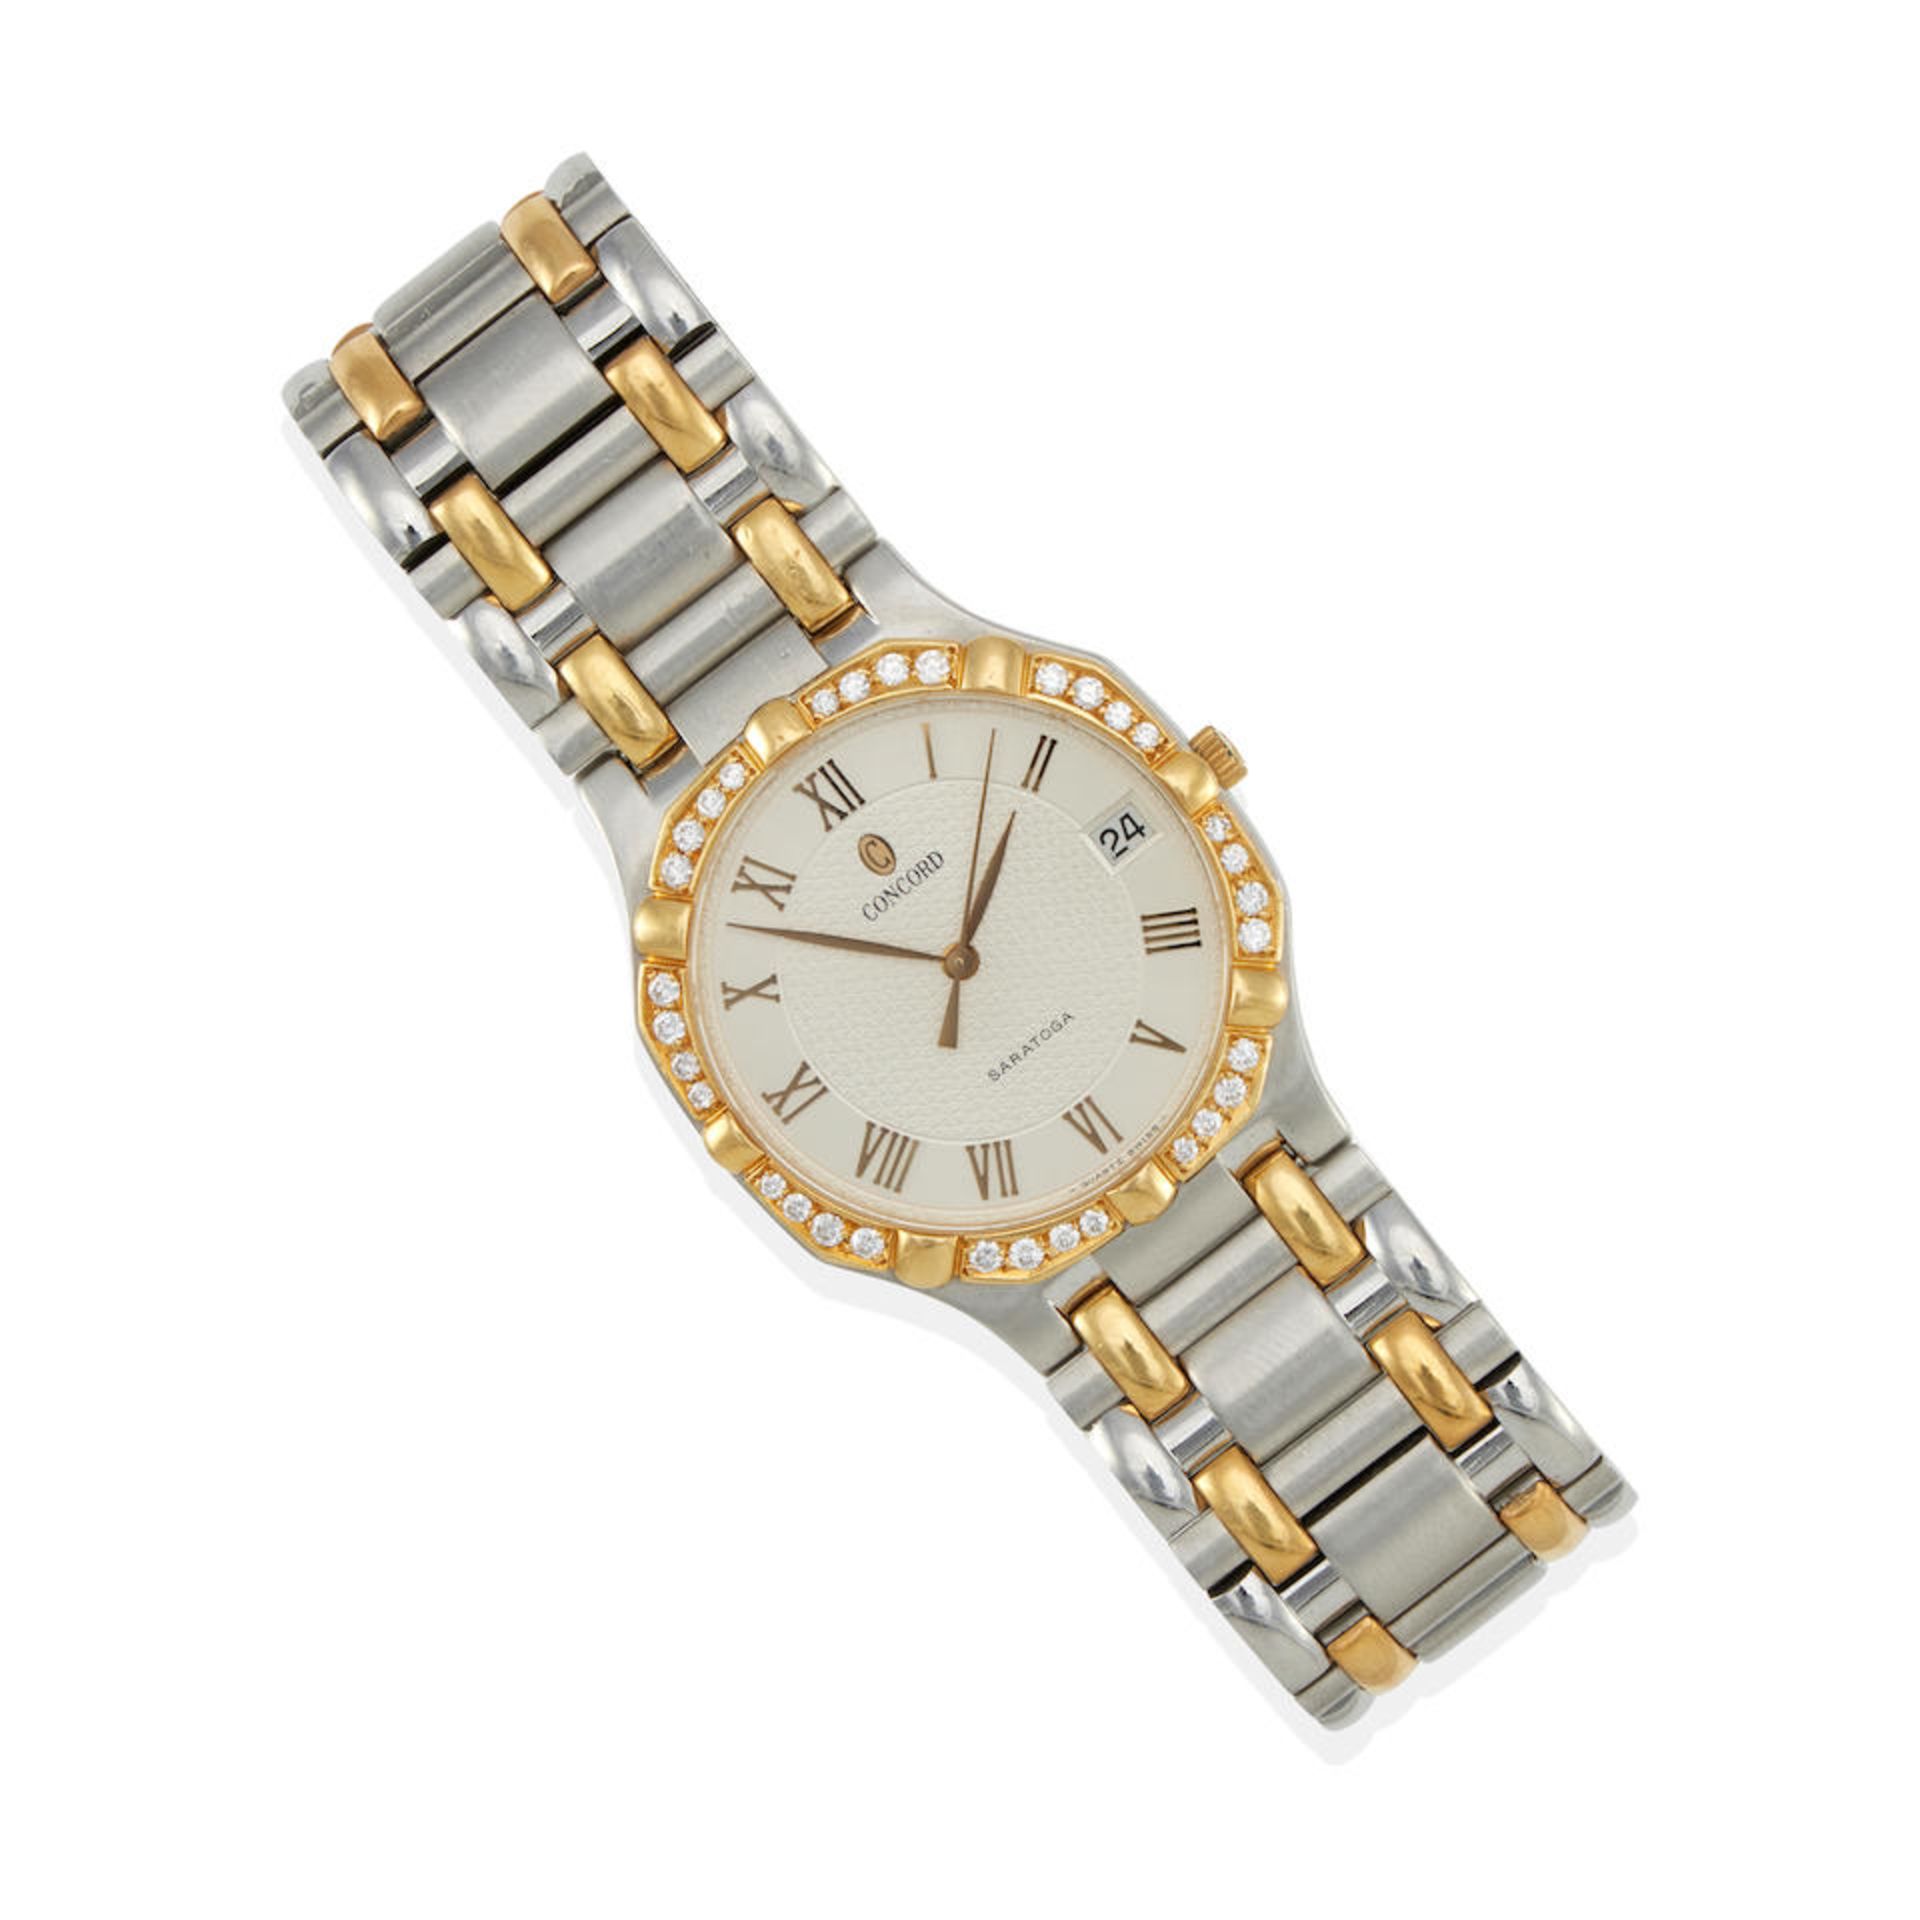 CONCORD: A STAINLESS STEEL, 18K GOLD AND DIAMOND 'SARATOGA' WRISTWATCH